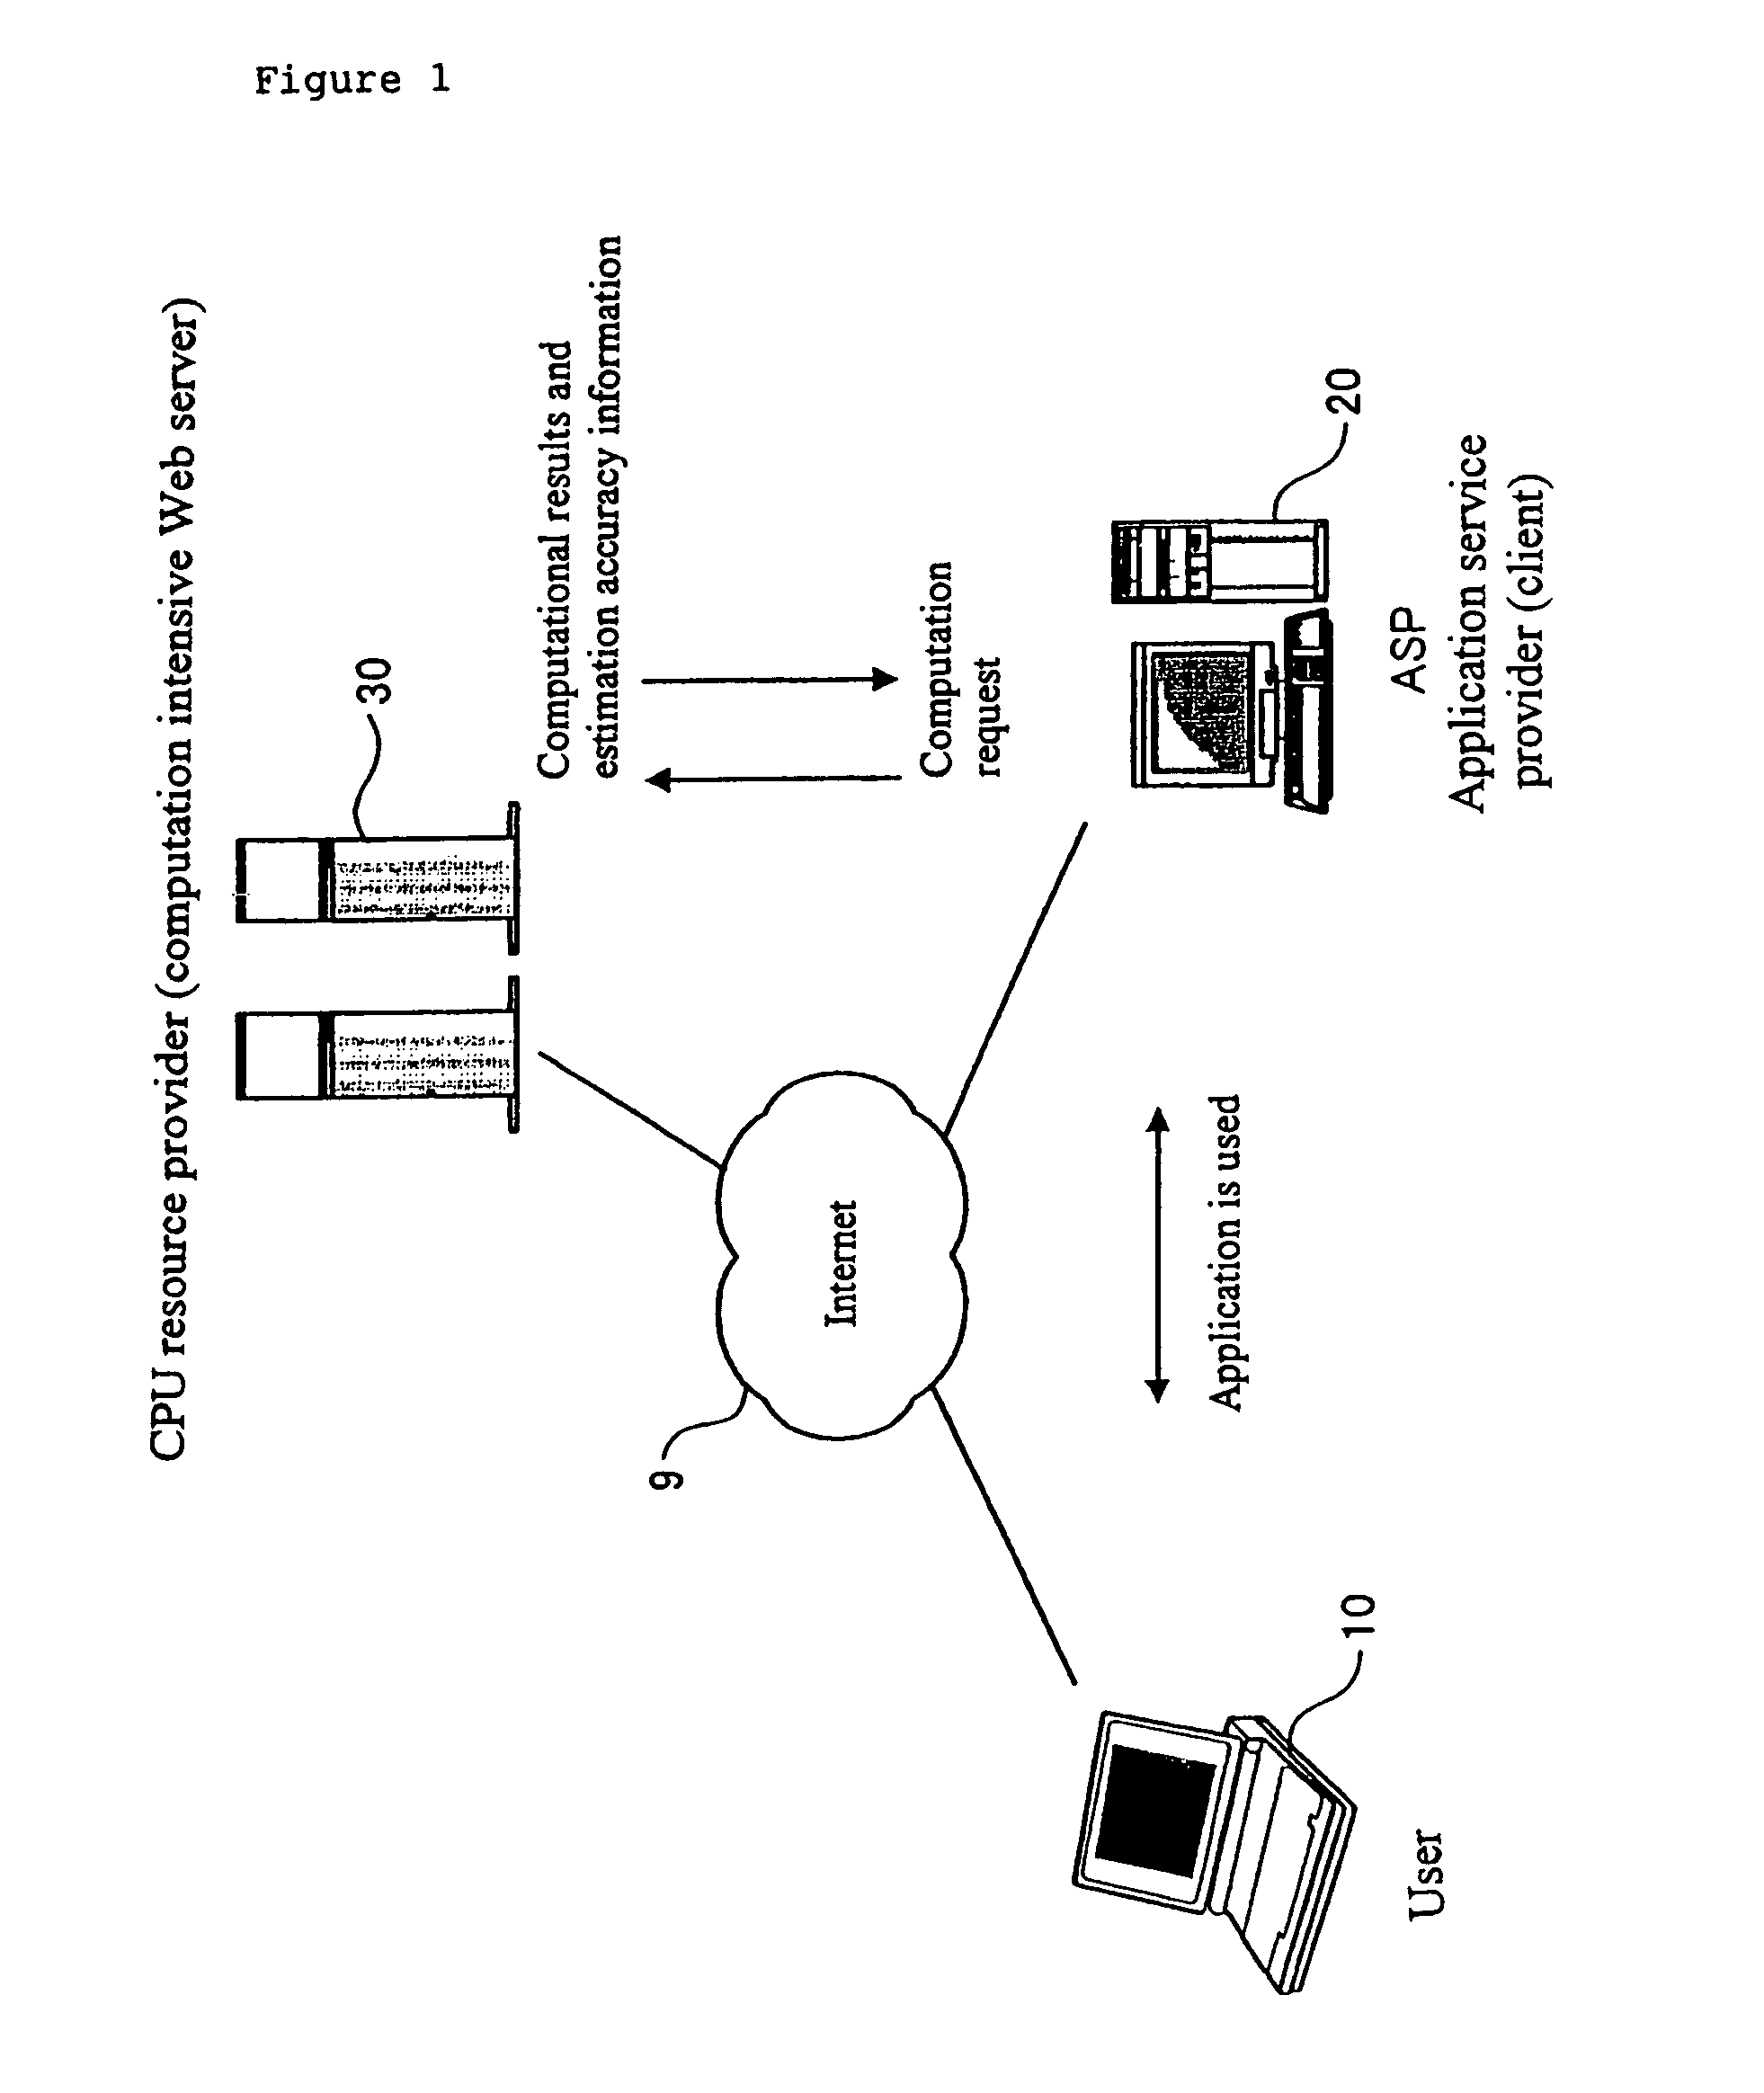 System for providing resources based on licensing contract with user by correcting the error between estimated execution time from the history of job execution